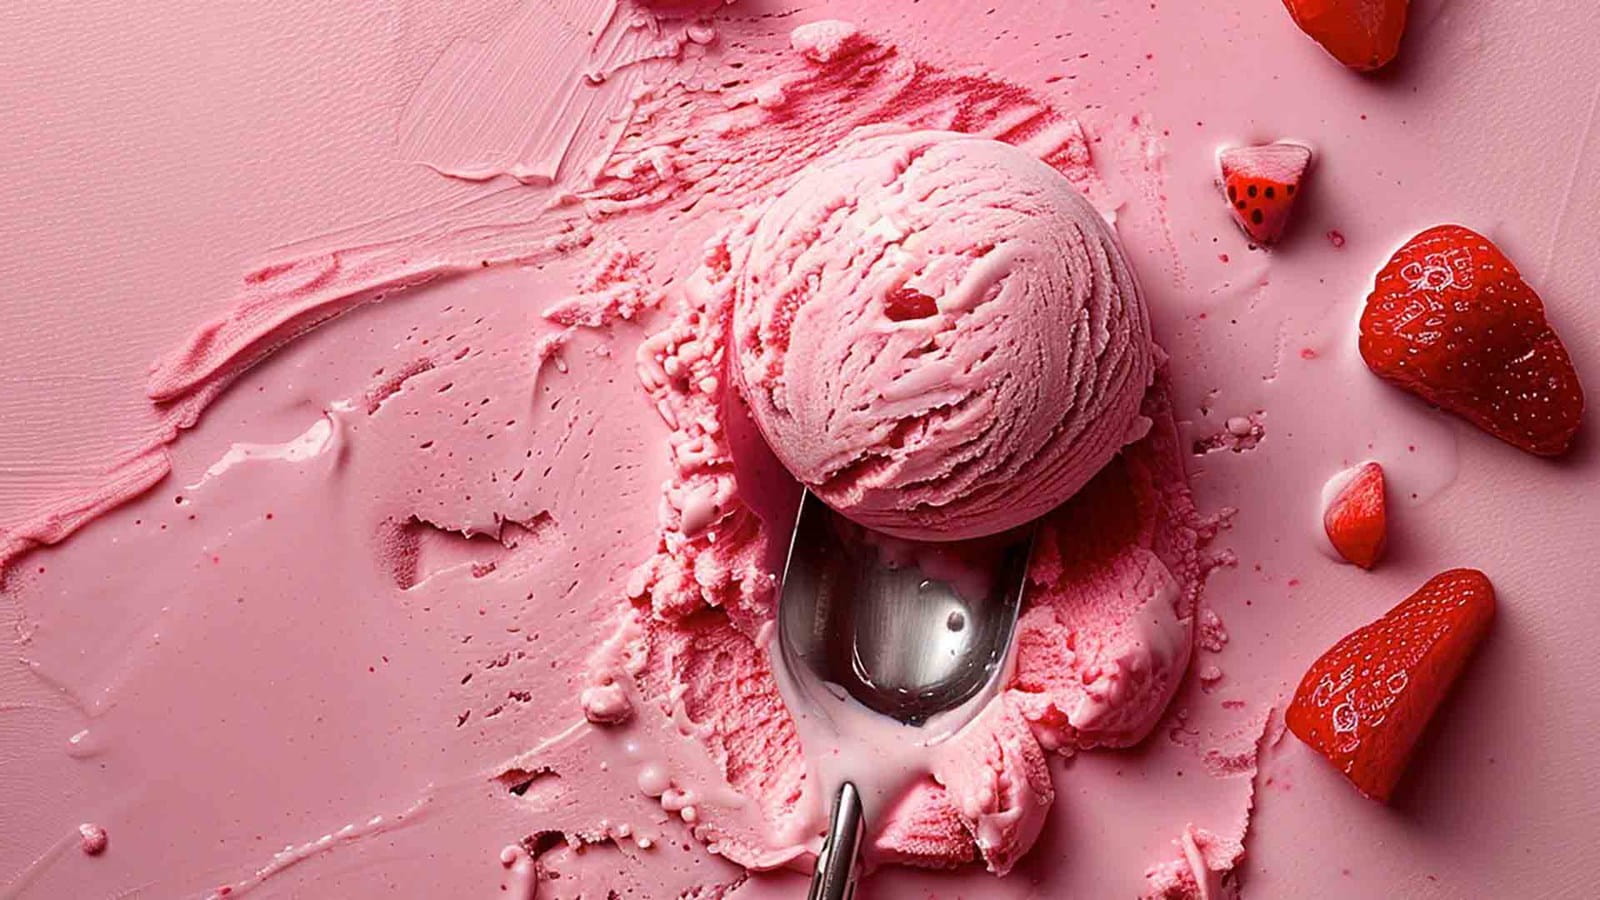 pink strawberry ice cream being scooped up with a spoon